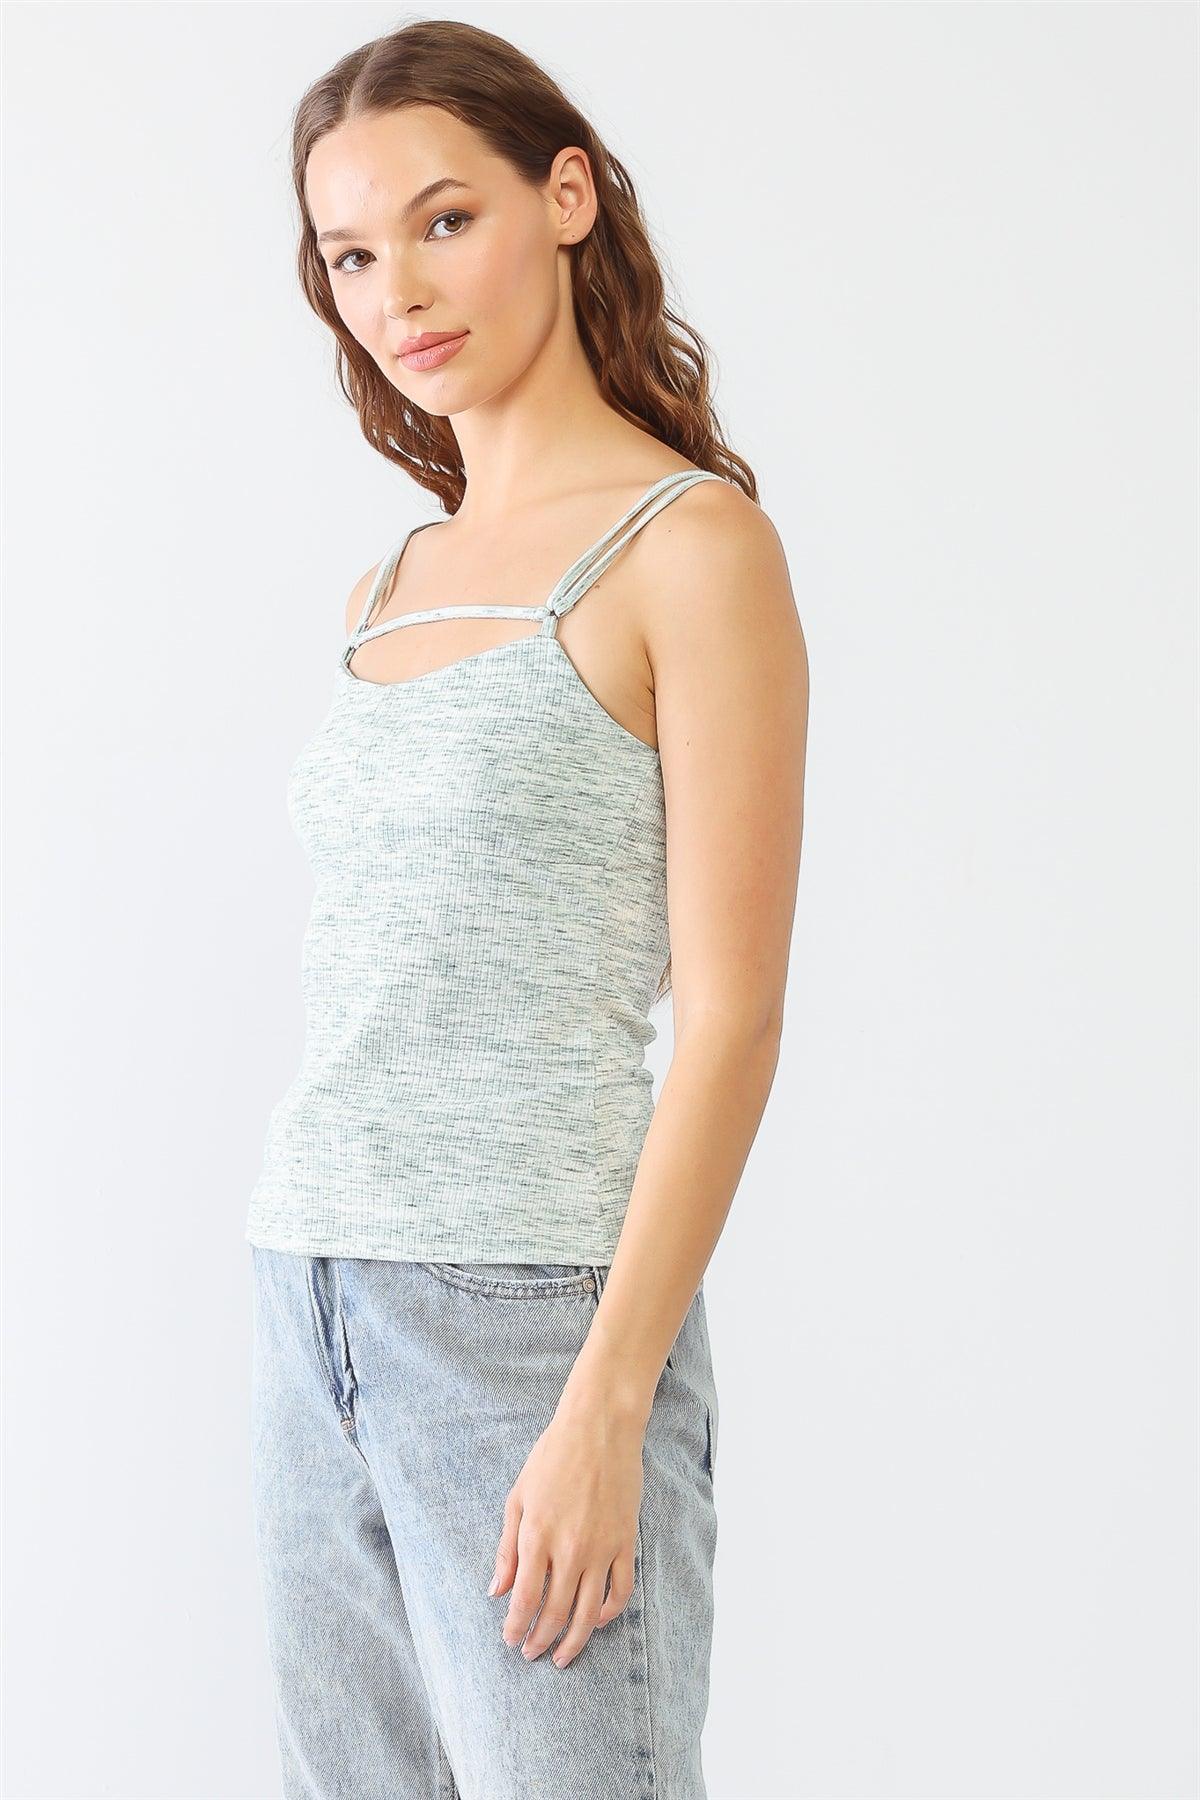 Cream & Green Printed Ribbed Sleeveless Strappy Top /3-2-1